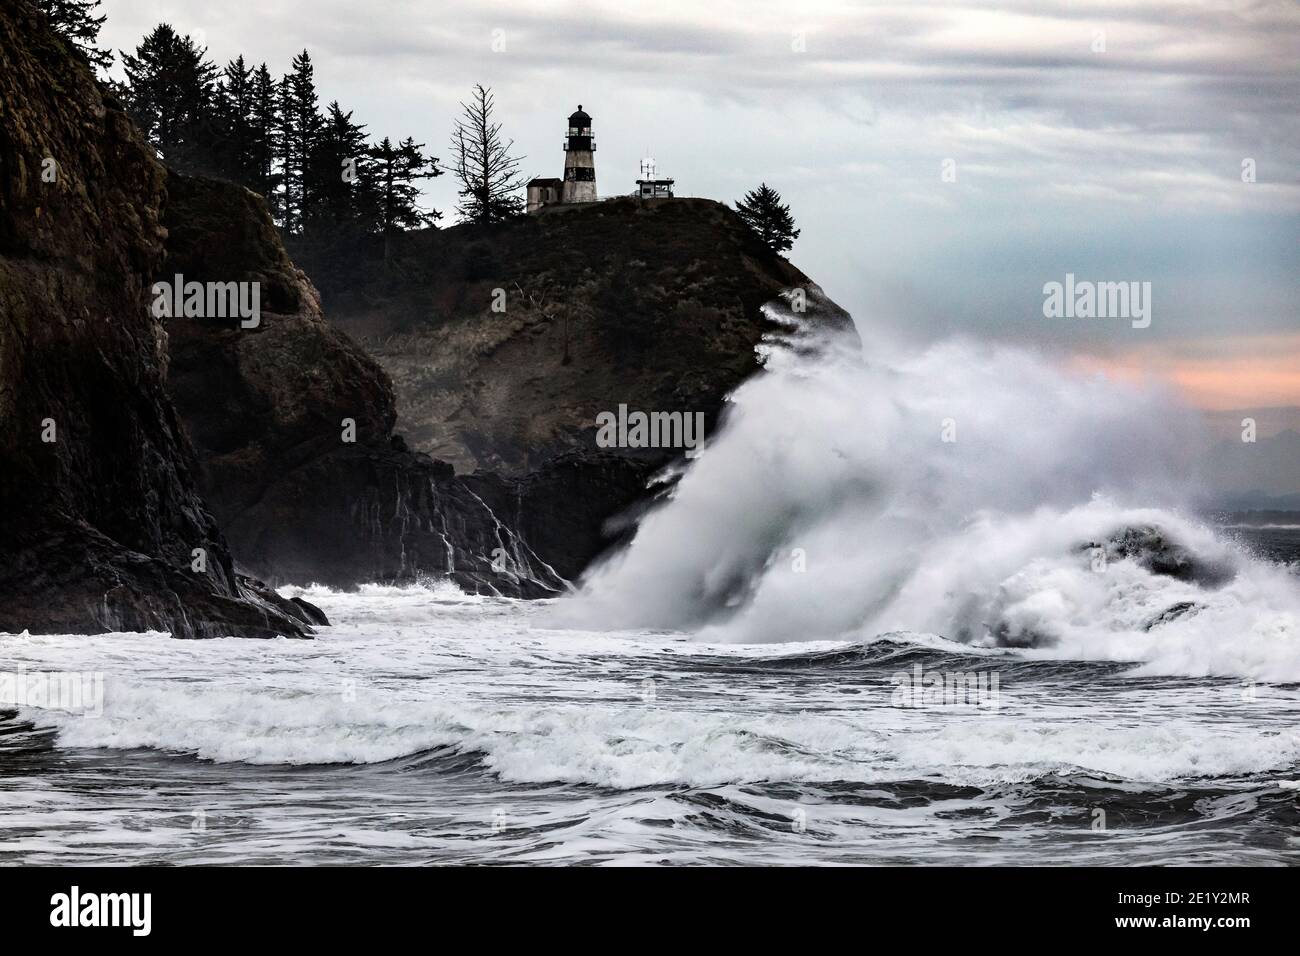 WA20034-00.....WASHIHGTON - Crashing surf at Cape Disappointment Lighthouse near the outflow of the Columbia River in Cape Disappointment State Park. Stock Photo